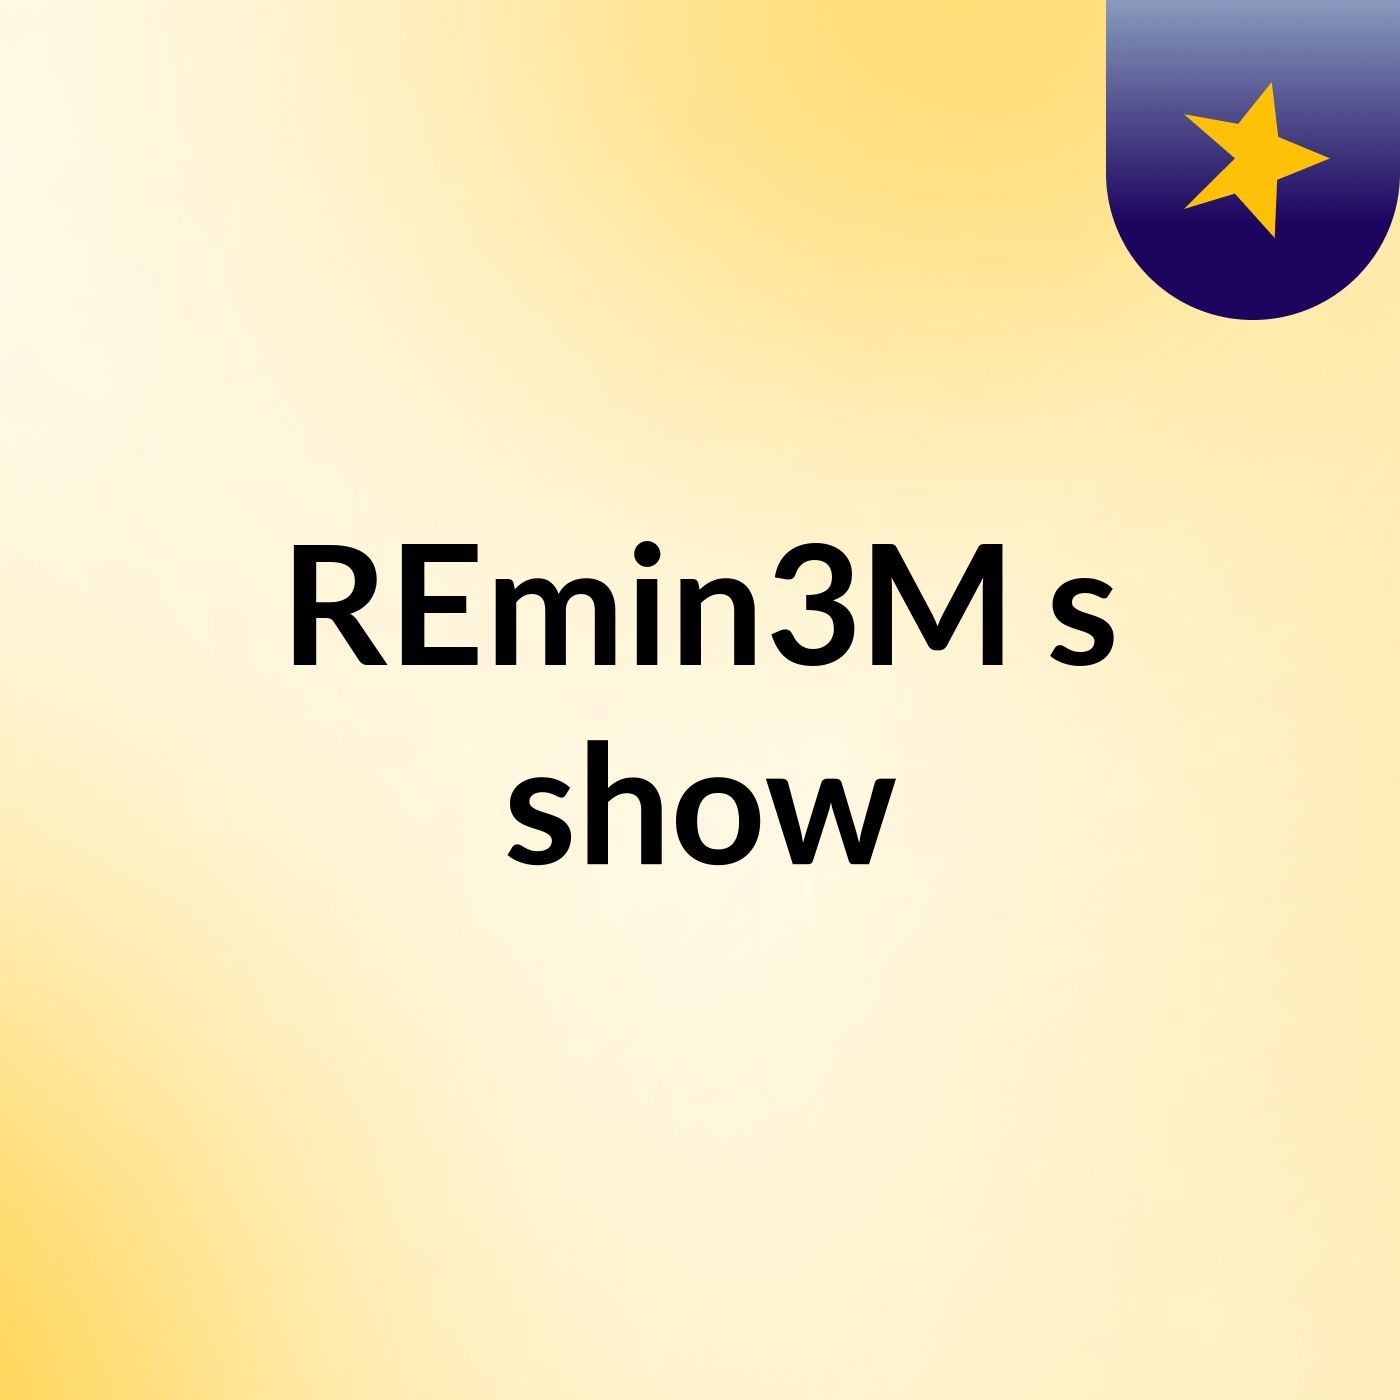 REmin3M's show